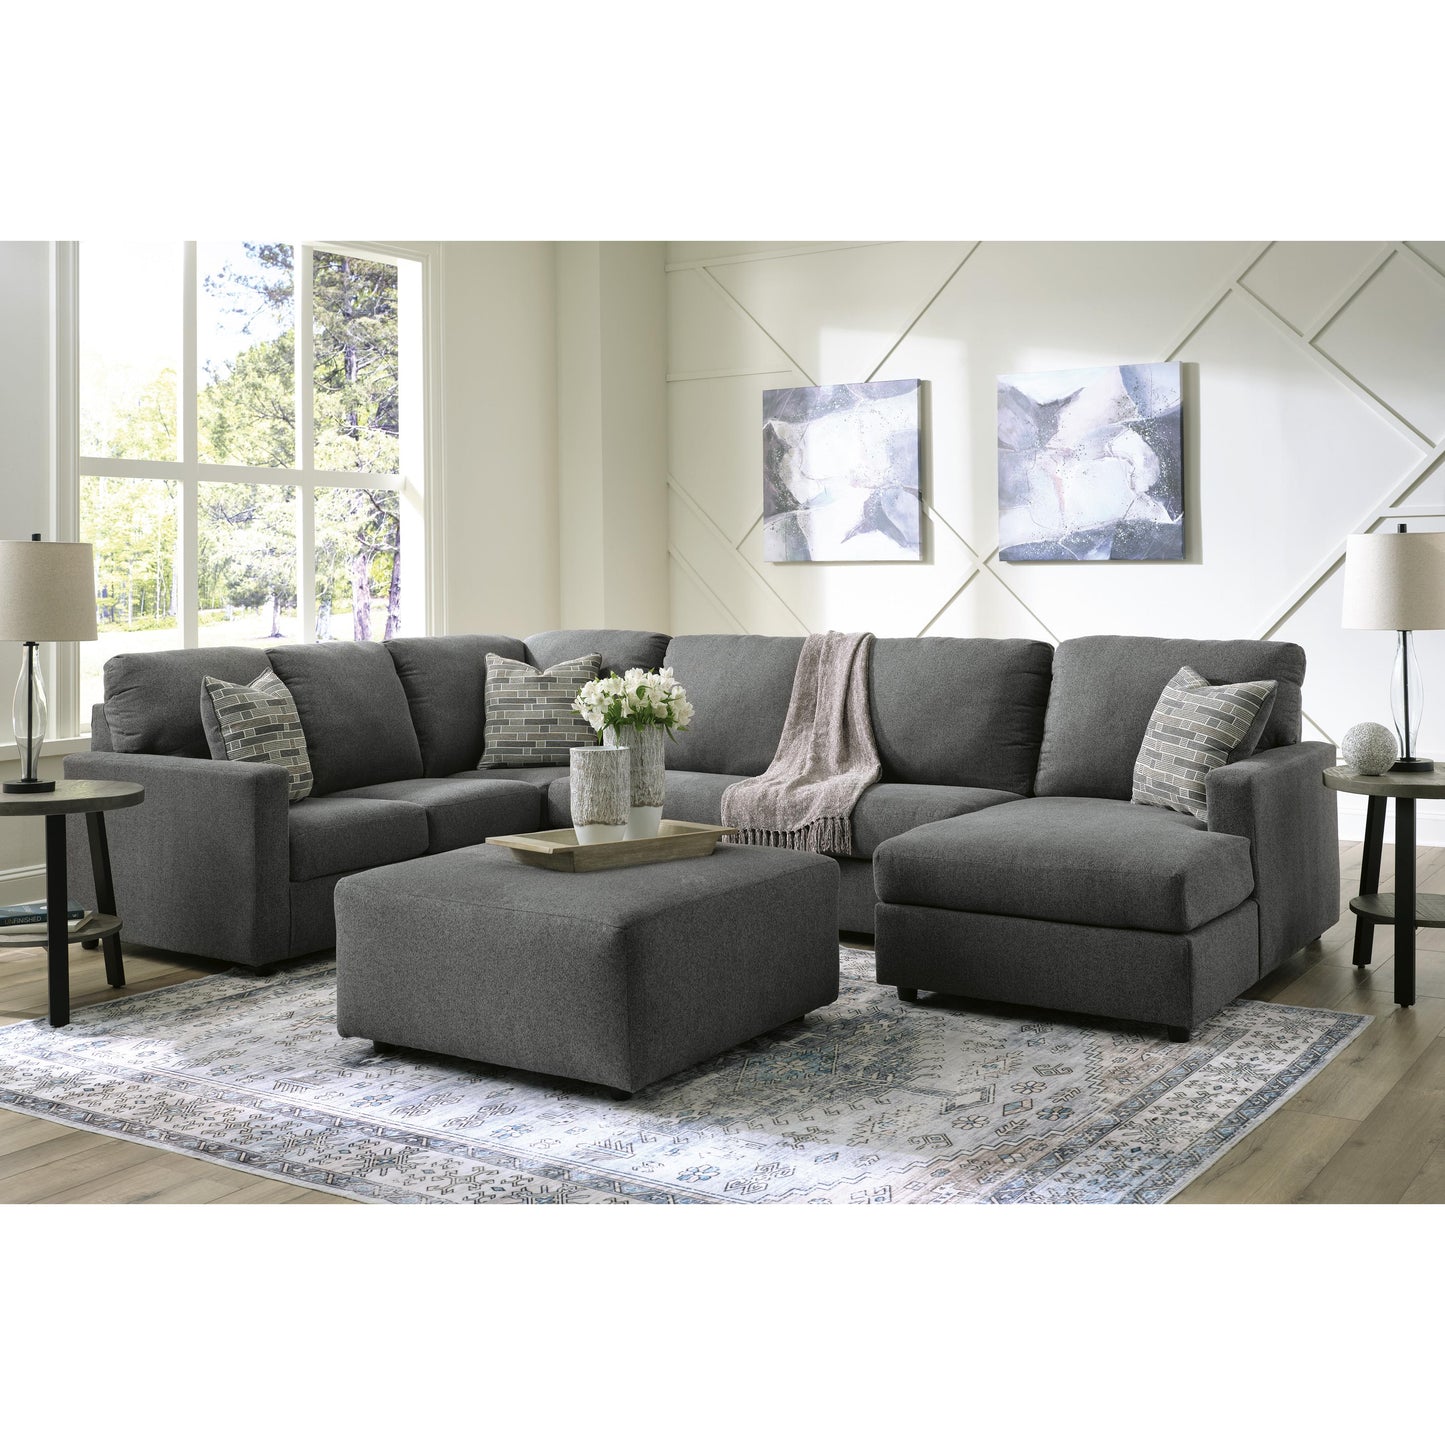 Signature Design by Ashley Edenfield Fabric 3 pc Sectional 2900348/2900334/2900317 IMAGE 5